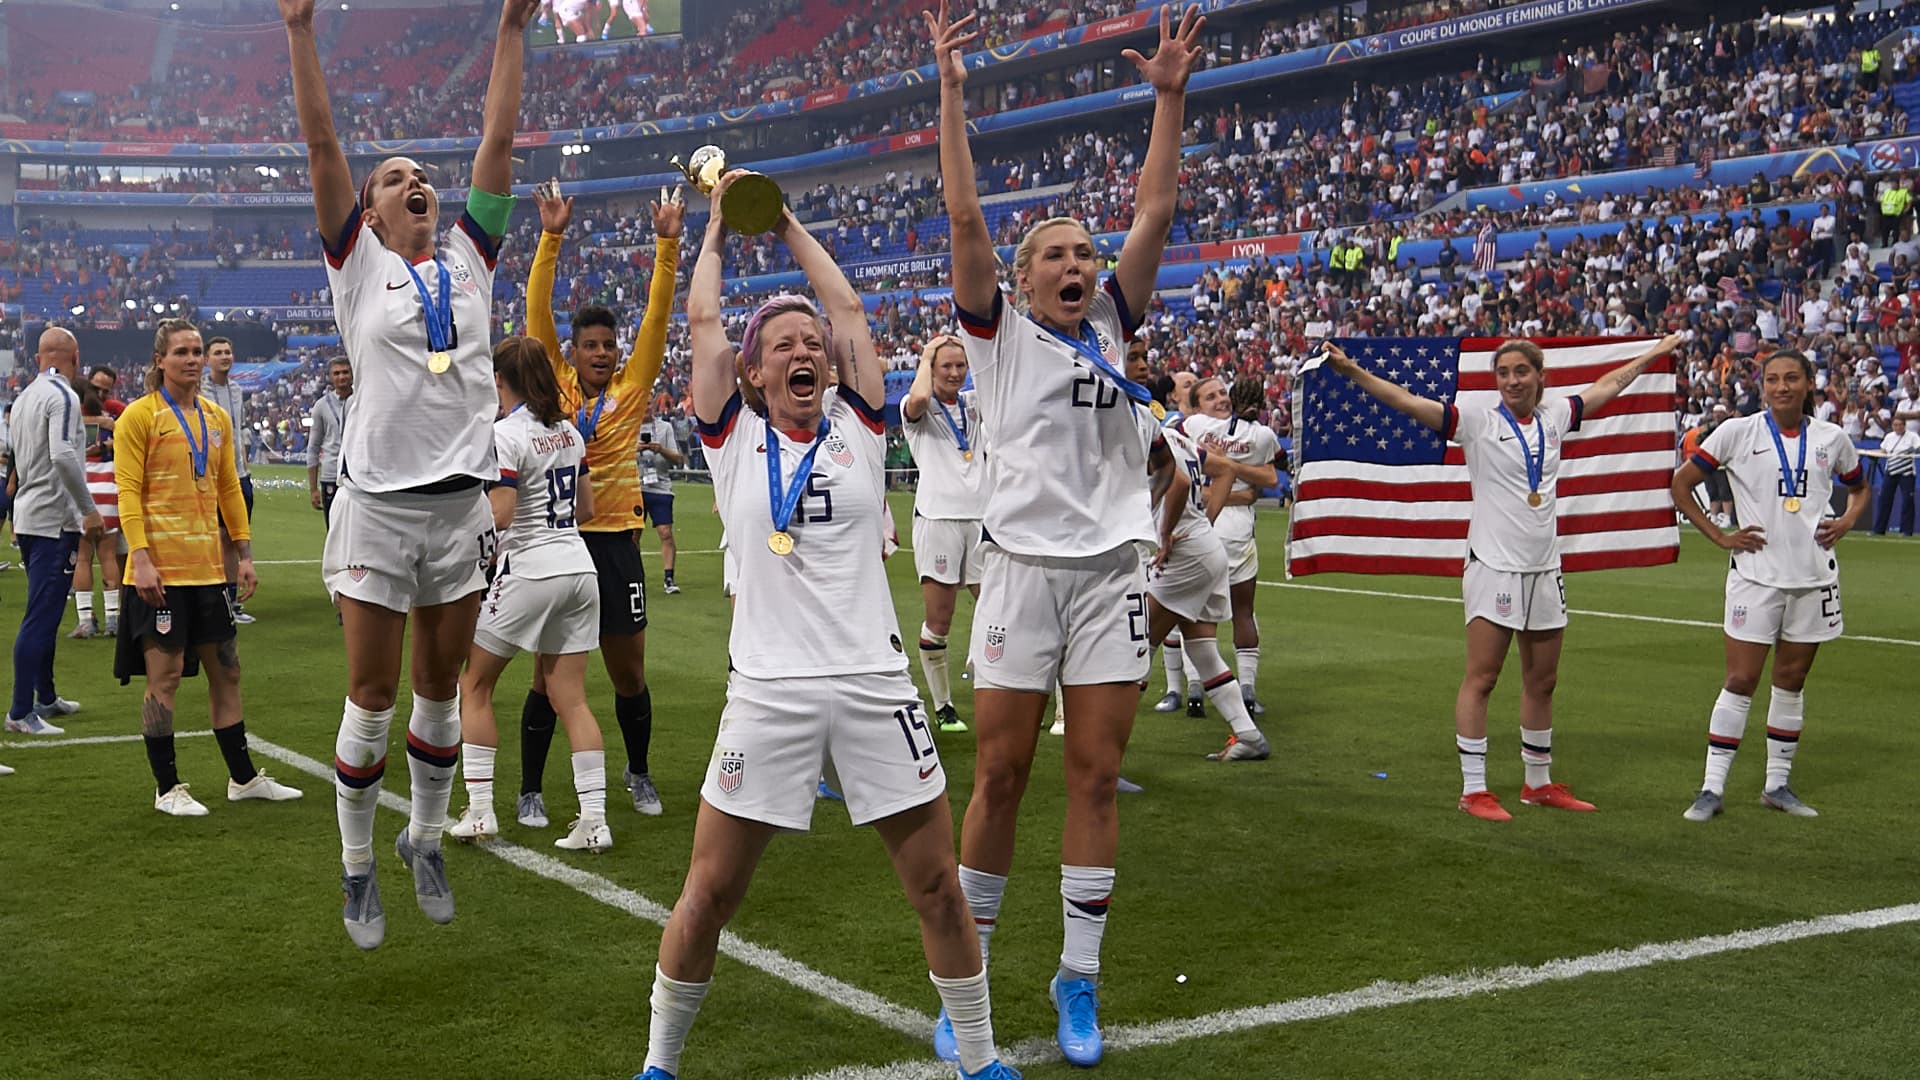 U.S. Soccer Federation and women’s team announce equal pay deal: ‘This is truly a historic moment’ – CNBC